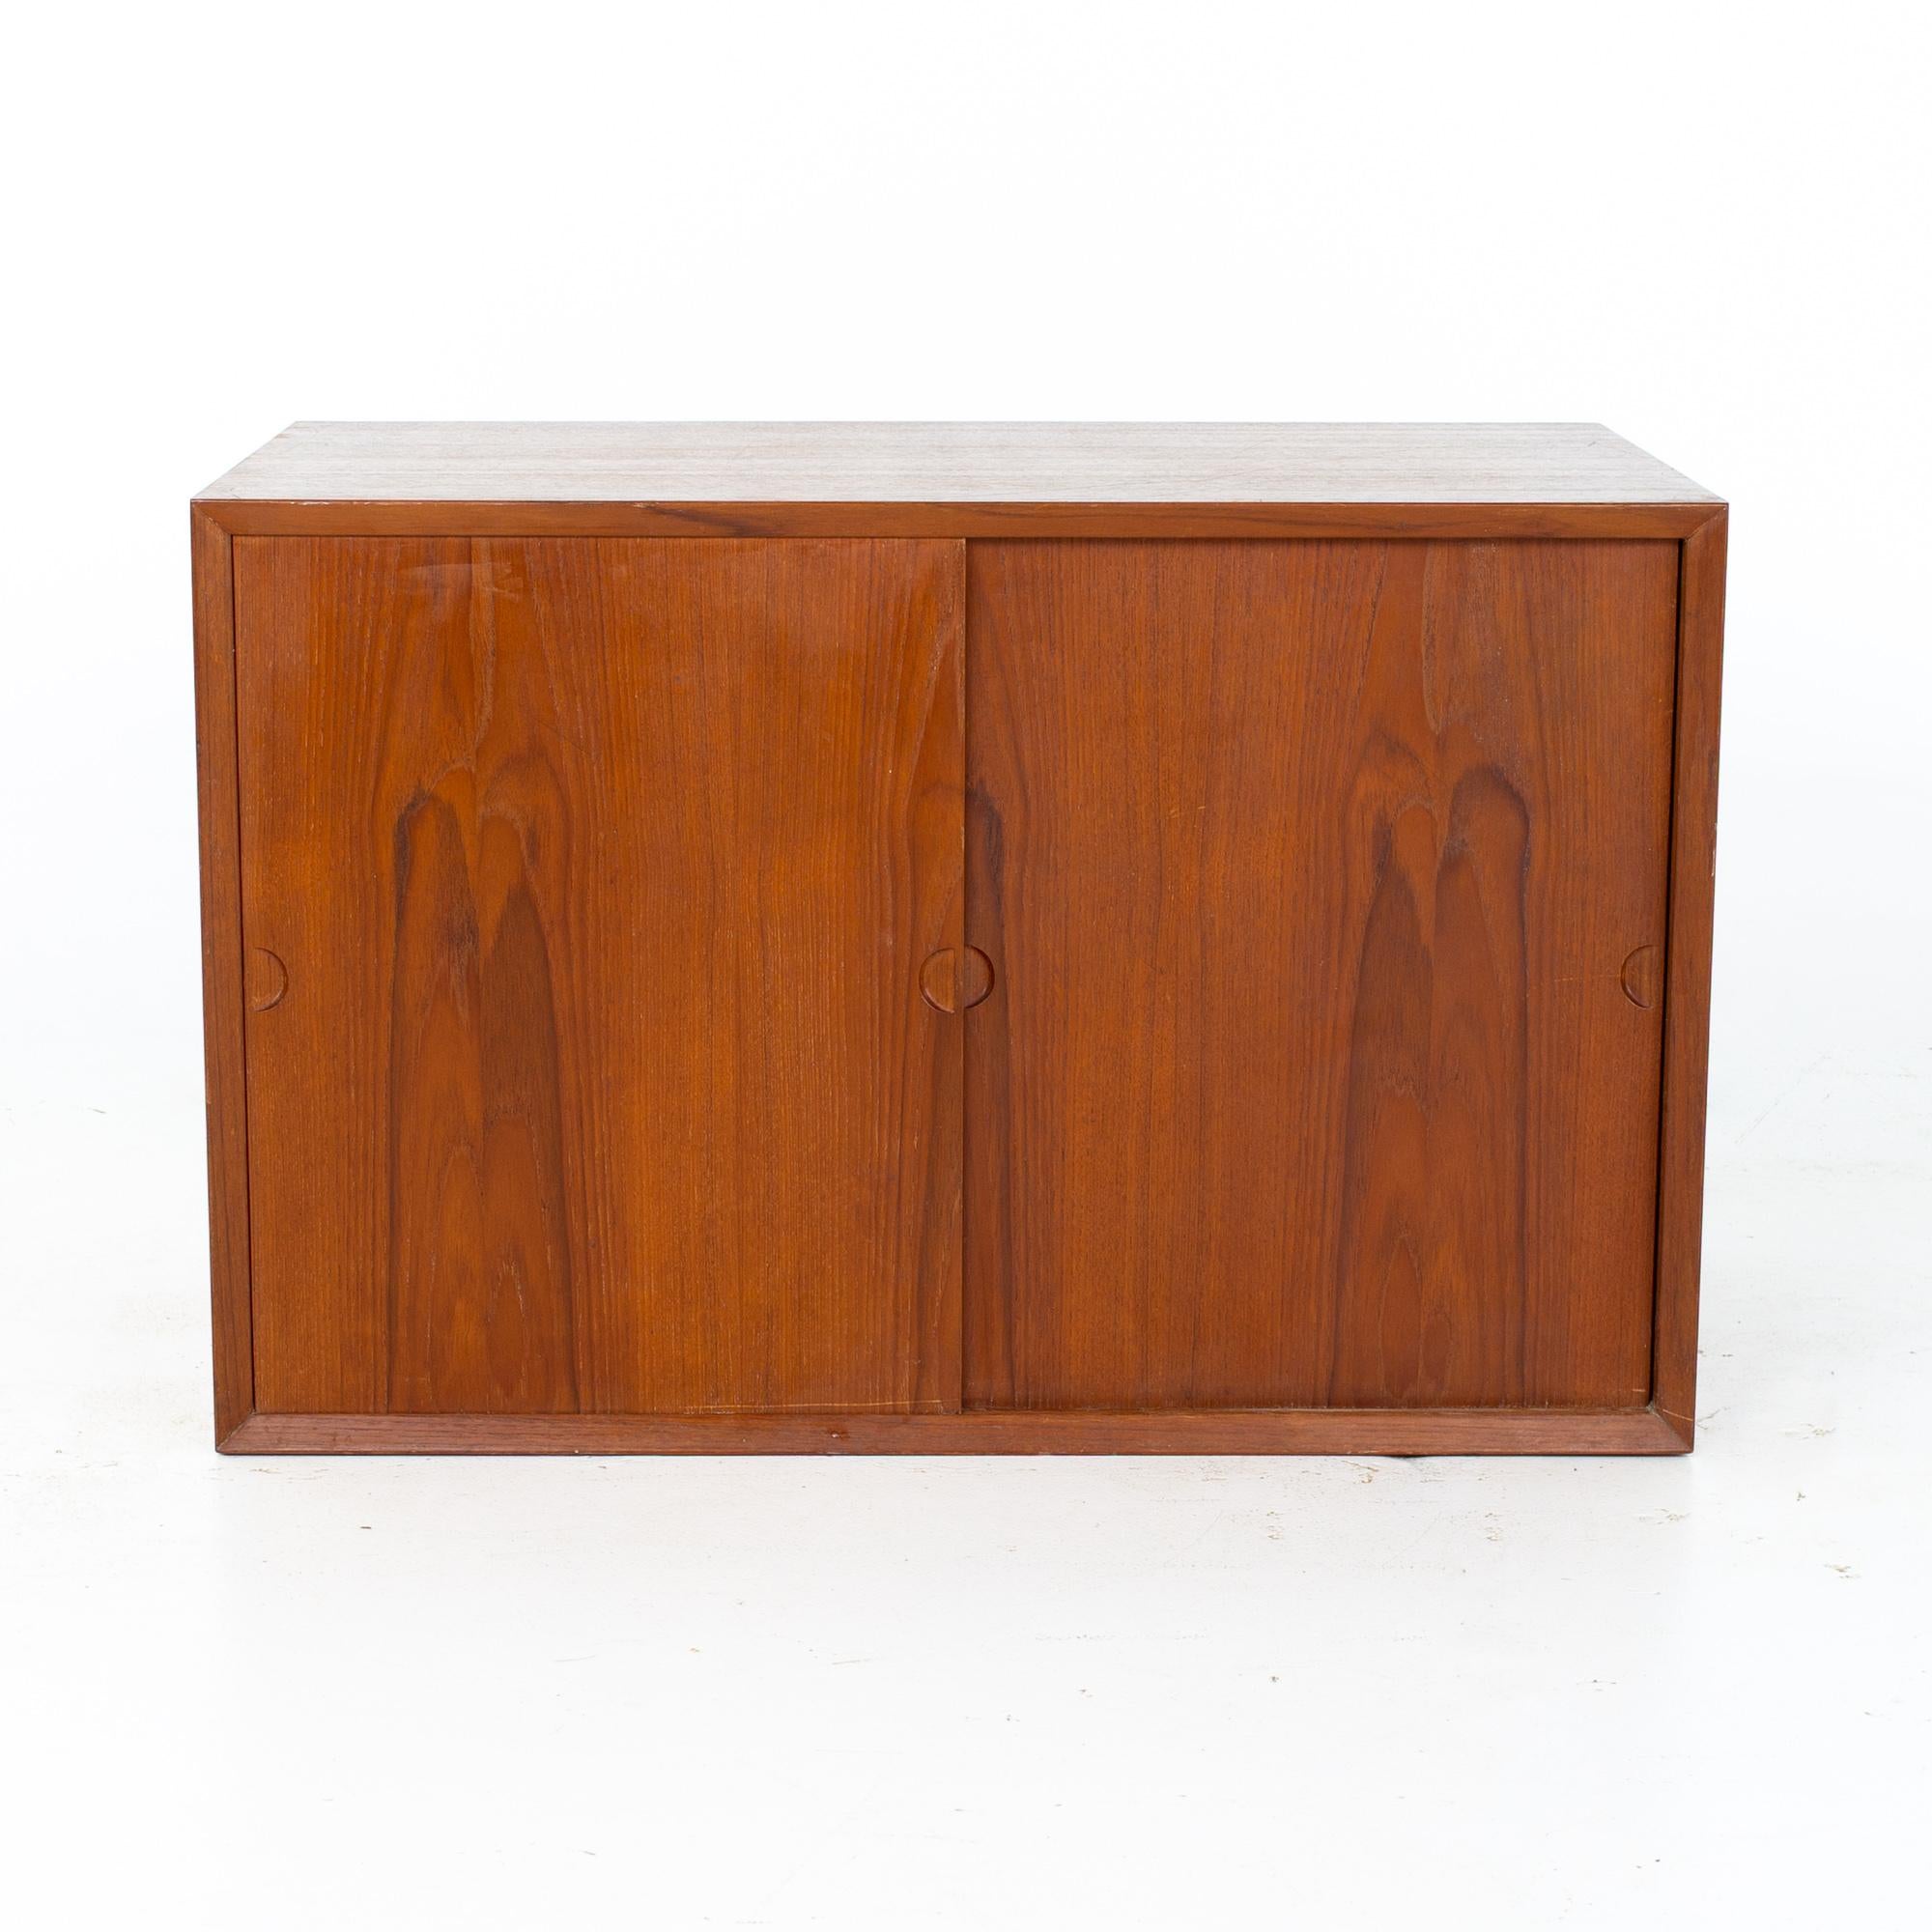 Cado Mid Century Teak Sliding Door Wall Unit Box

Wall unit box measures: 31.5 wide x 18 deep x 20.5 inches high

All pieces of furniture can be had in what we call restored vintage condition. That means the piece is restored upon purchase so